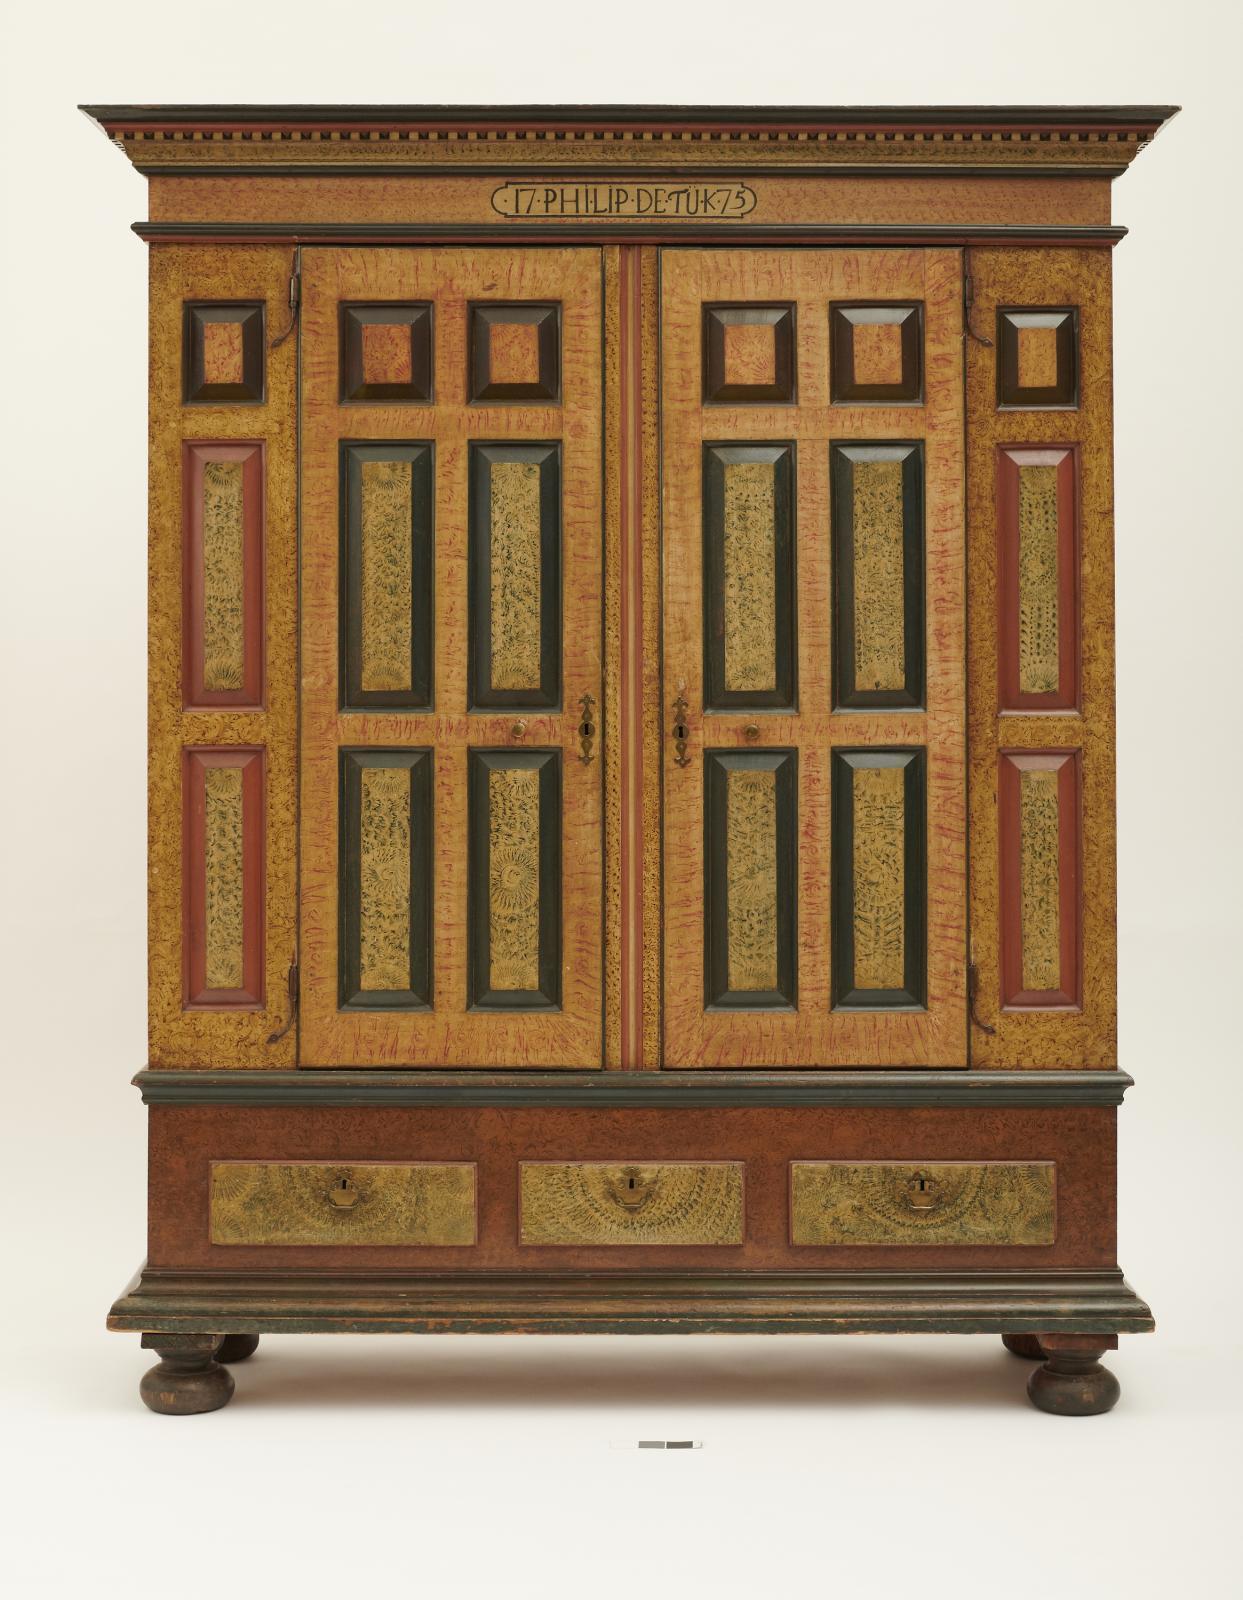 Large wooden wardrobe with panels, each with a border of red, green or black and painted decoration simulating the look of wood grain; drawers across bottom and cornice at top.